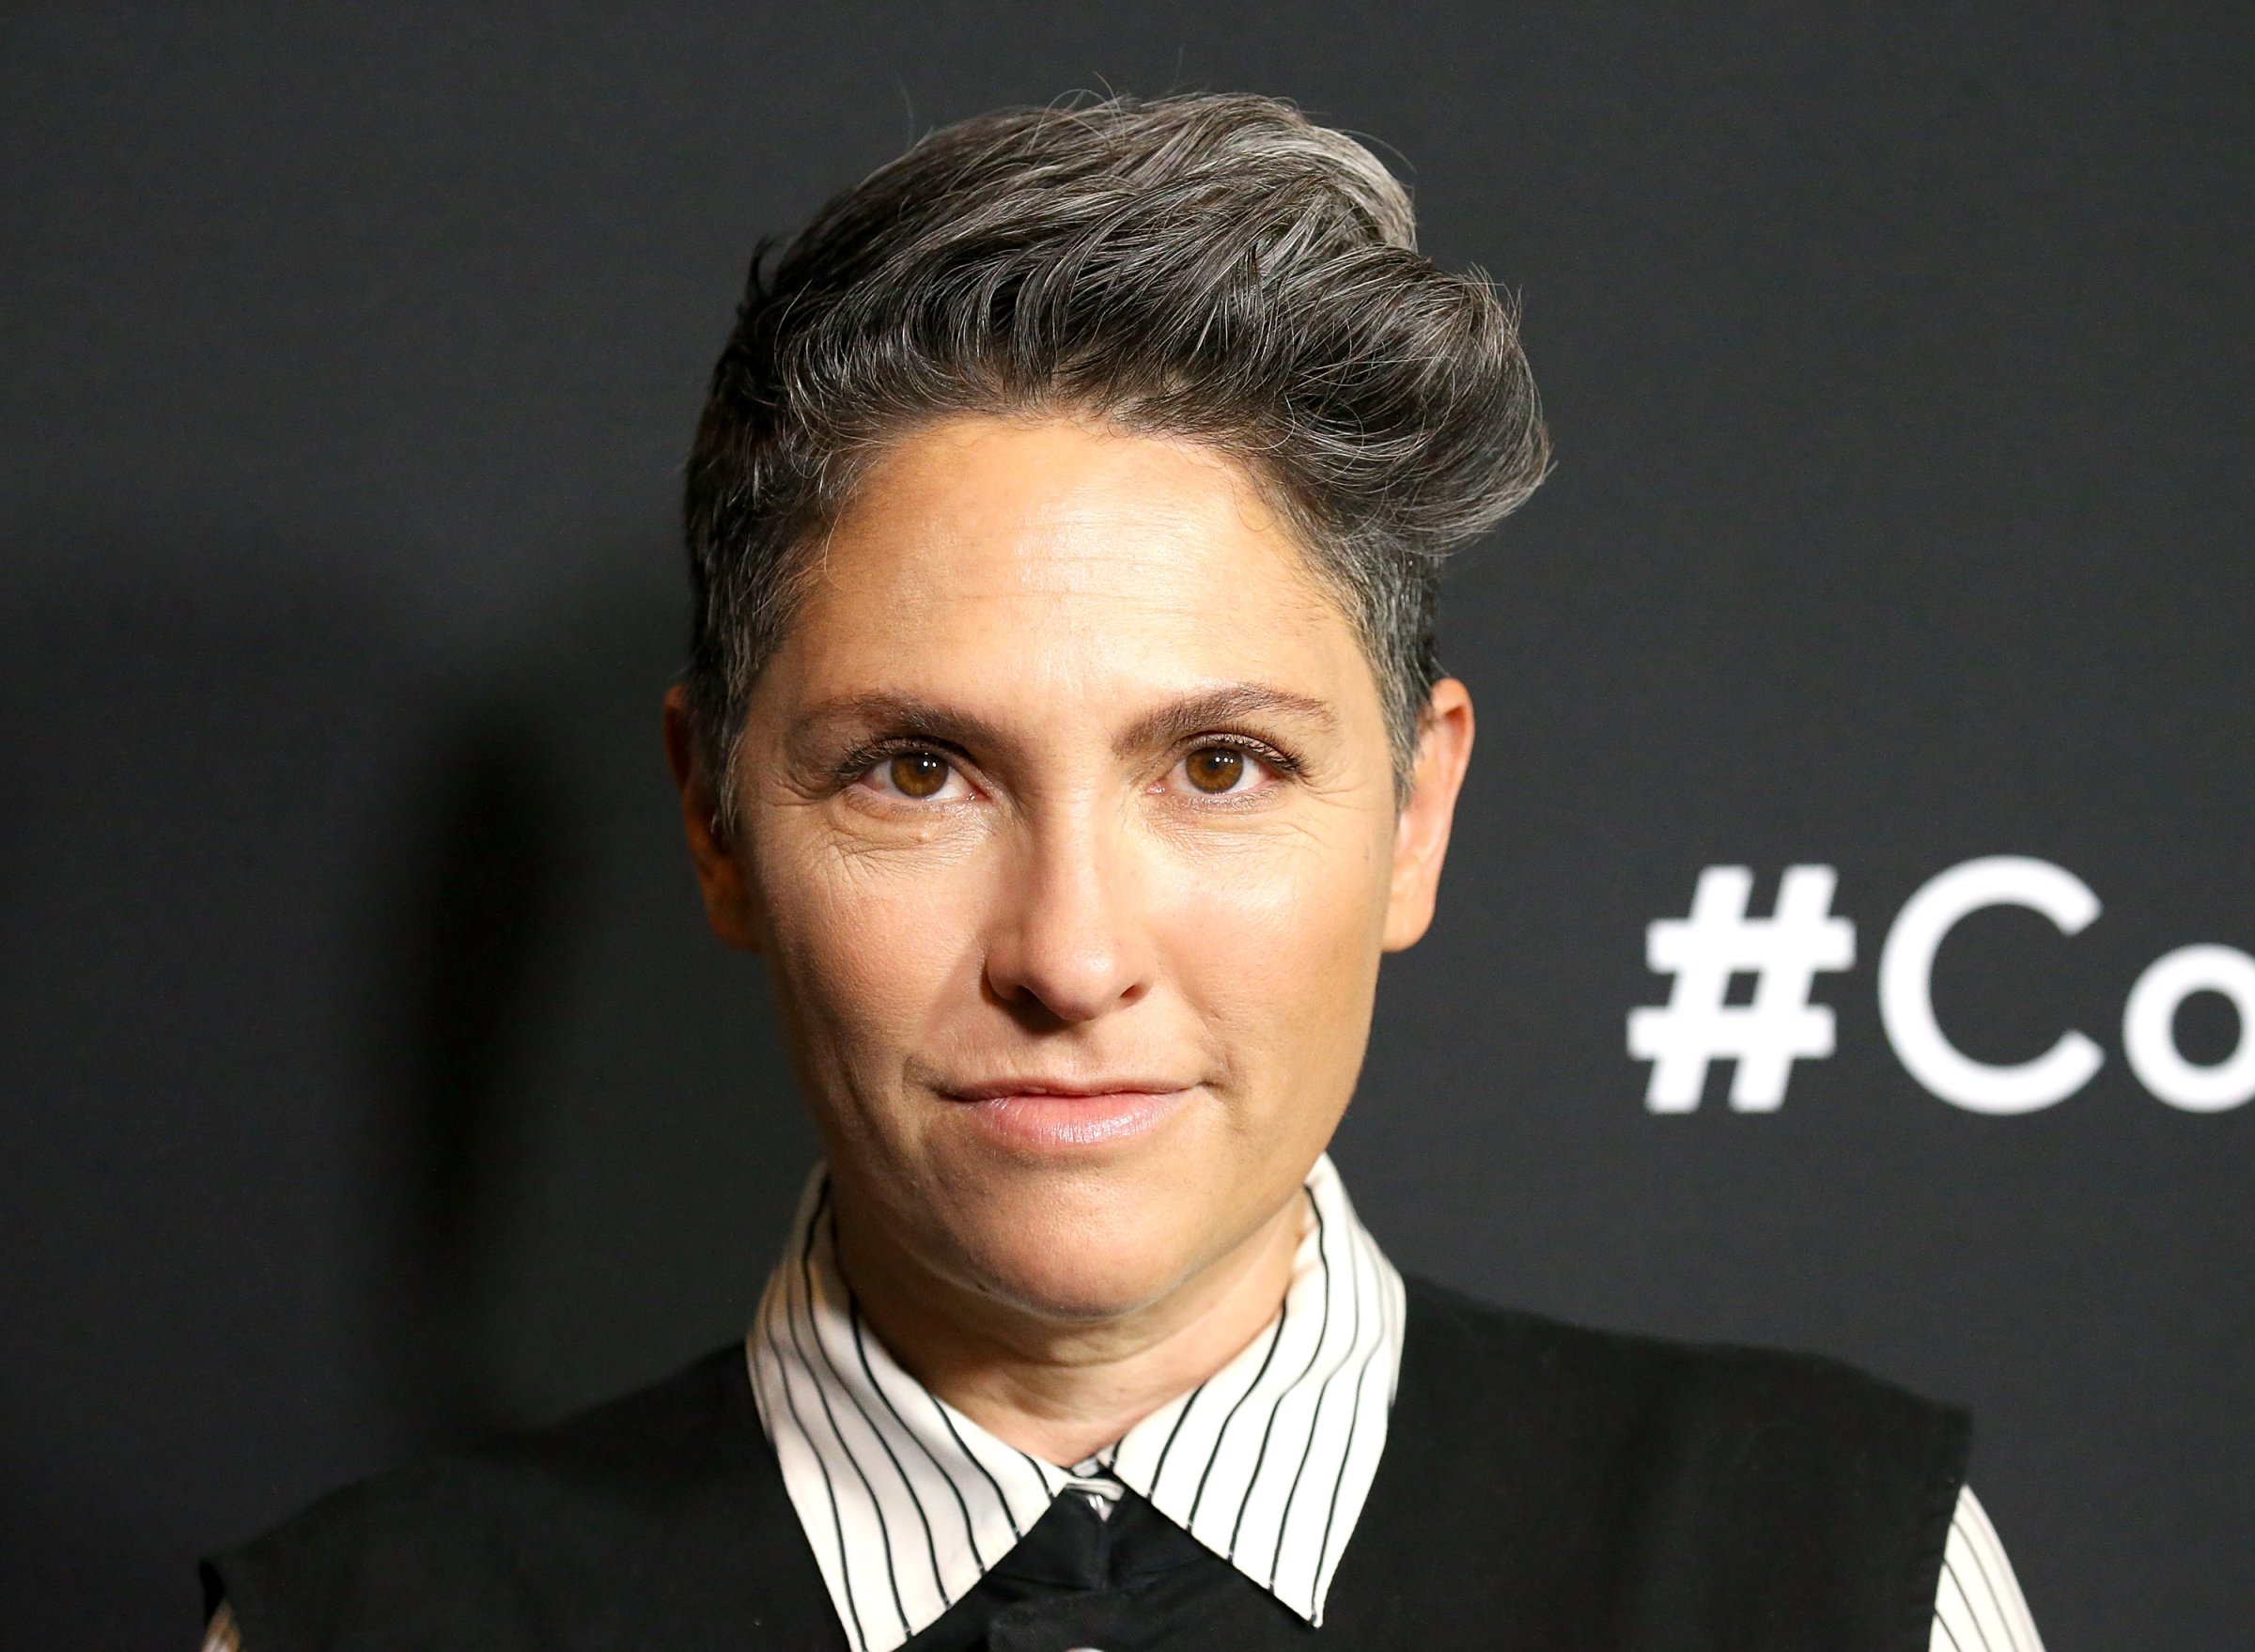 Jill Soloway arrives at the FYC special screening for Amazon's "Transparent" held at DGA Theater on May 5, 2016 in Los Angeles, California.